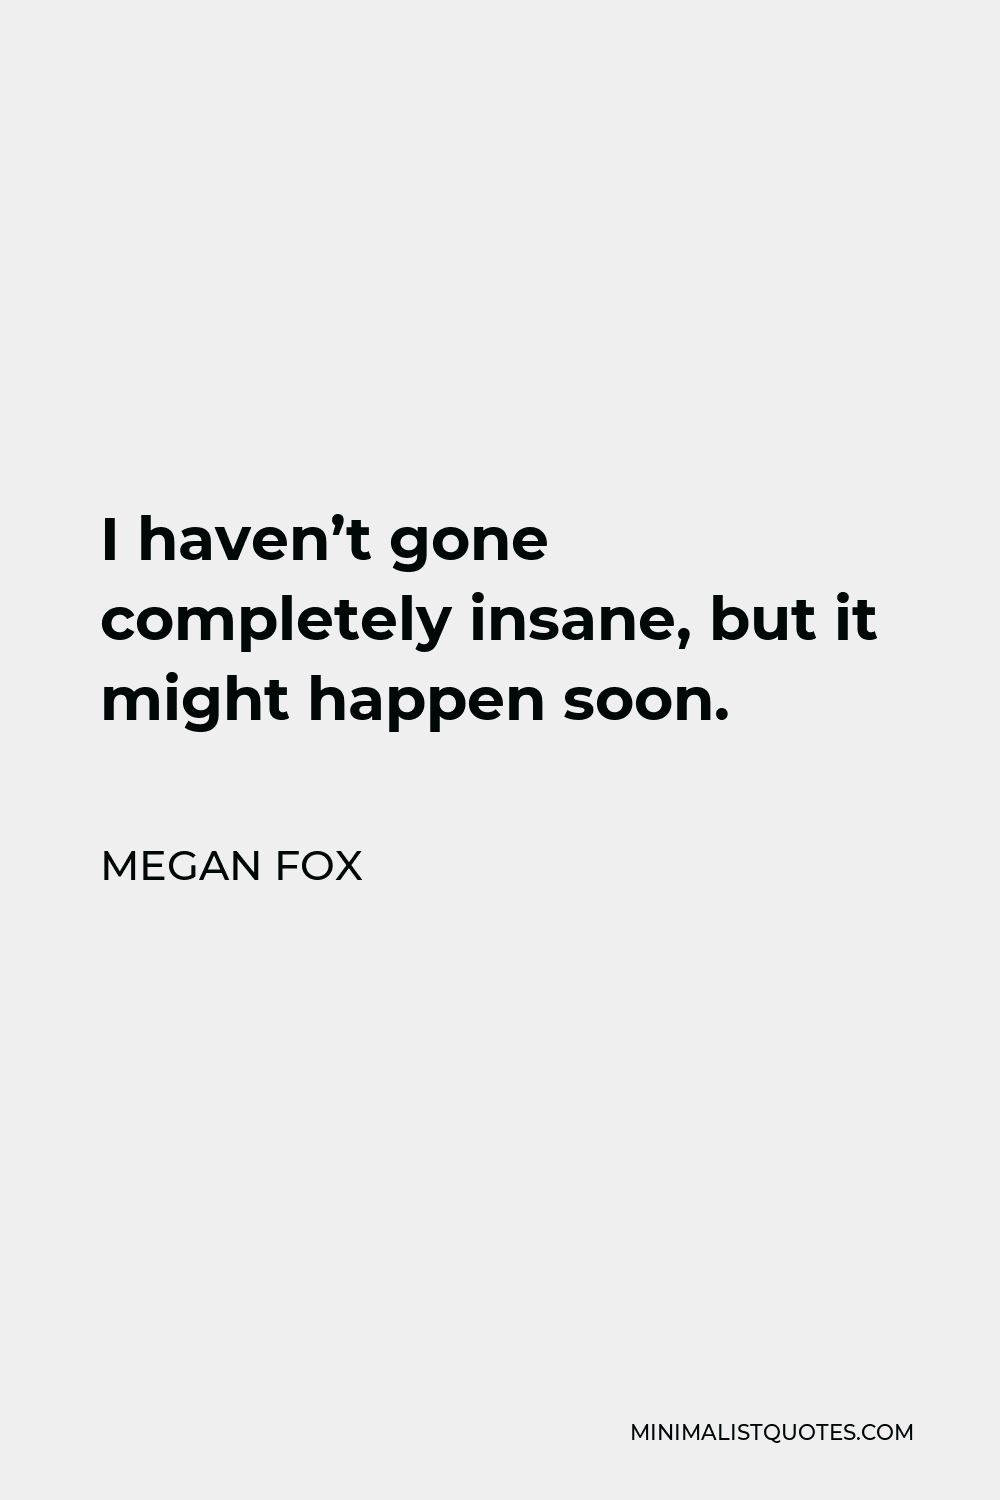 Megan Fox Quote - I haven’t gone completely insane, but it might happen soon.